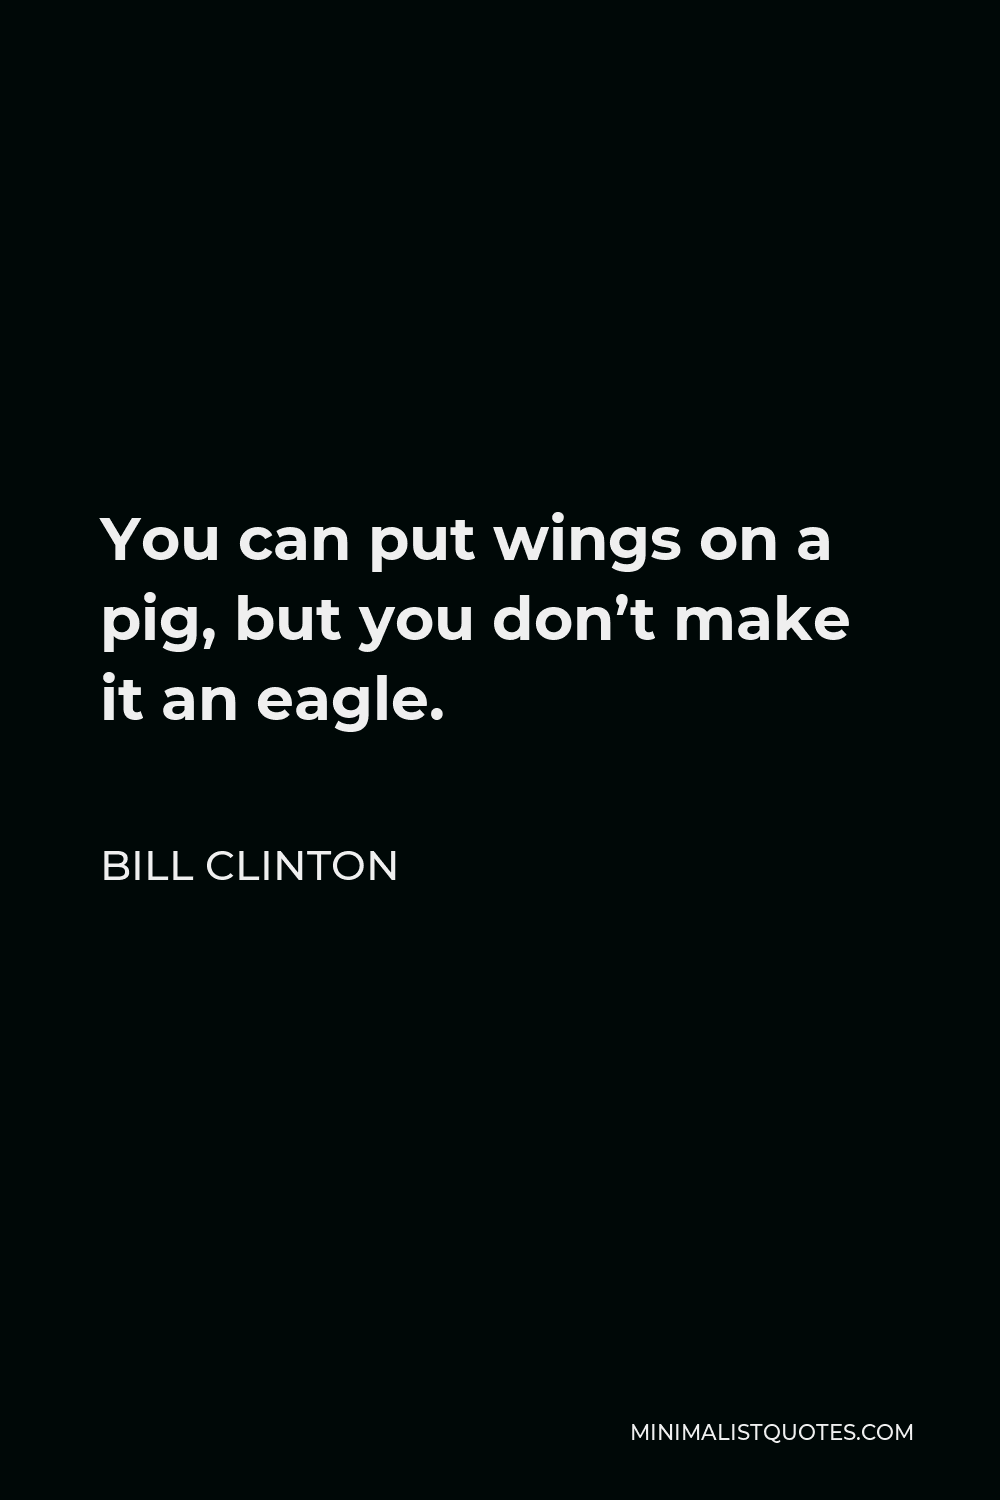 Bill Clinton Quote - You can put wings on a pig, but you don’t make it an eagle.